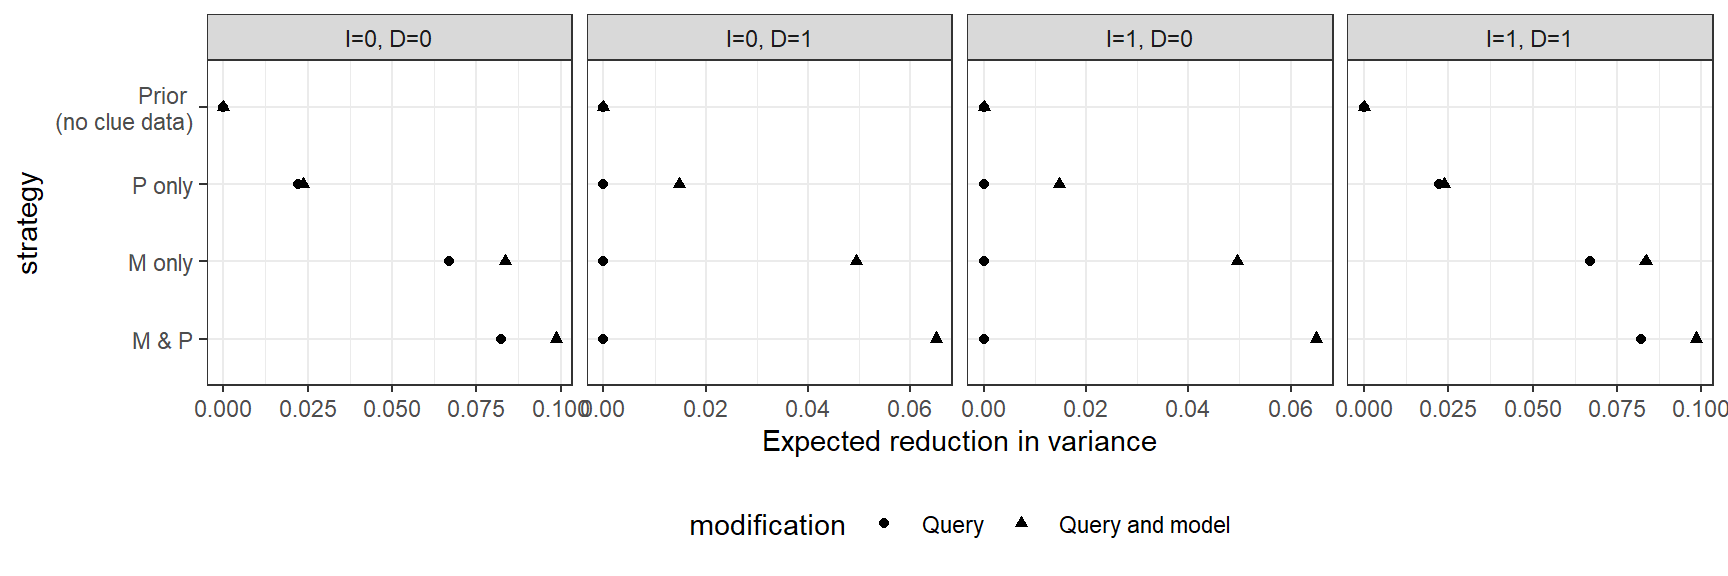 Revised query and/or model: Expected reduction in posterior variance from different data strategies for cases with different I and D values